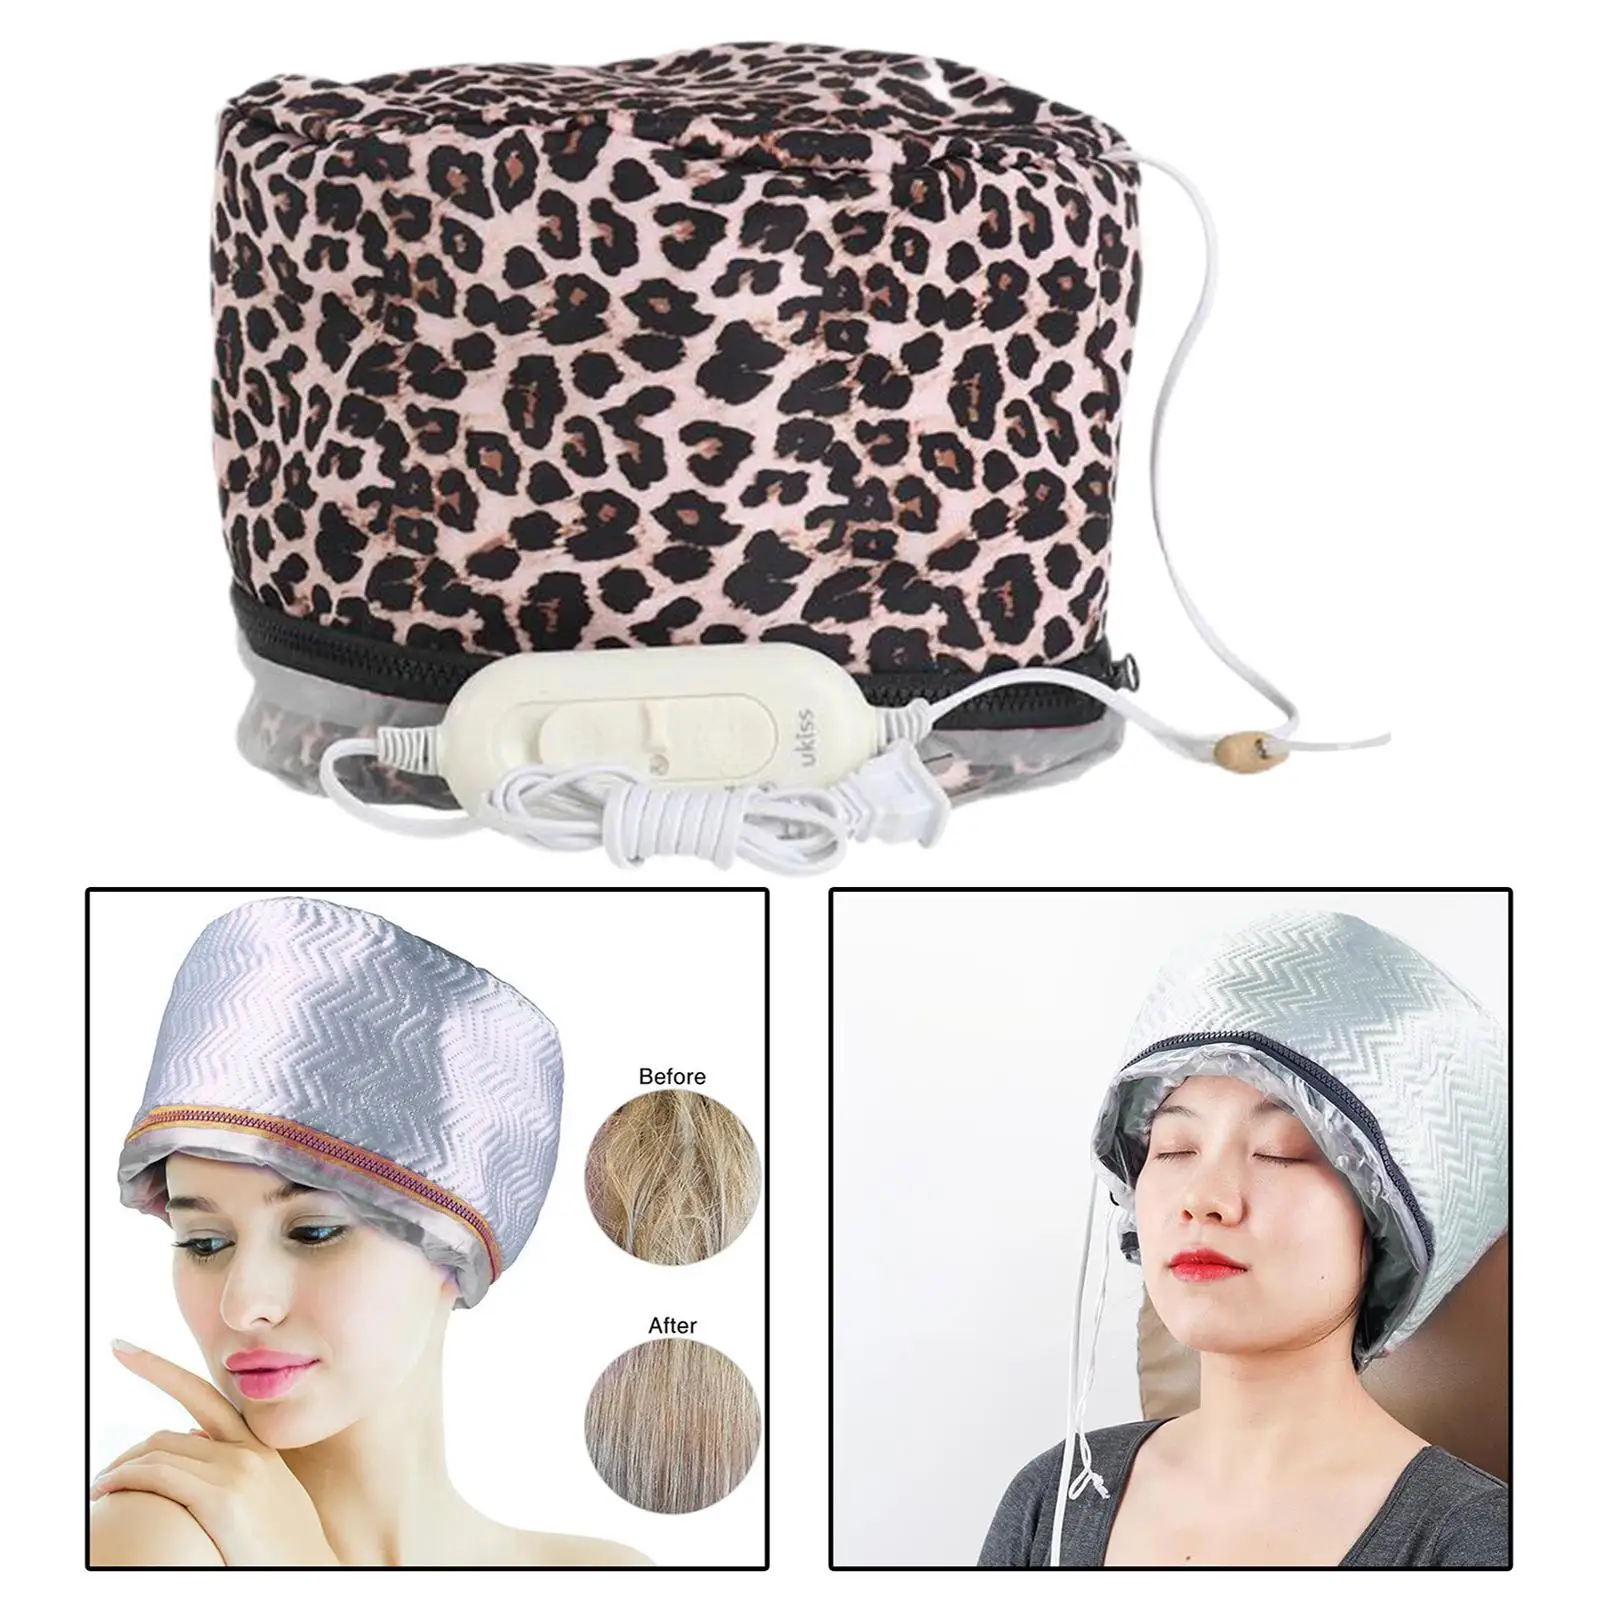  Care Steamer Hat Deep Conditioning Beauty Steamer Moisturizing Thermal Caps Adjustable Temperature Control Home Use US